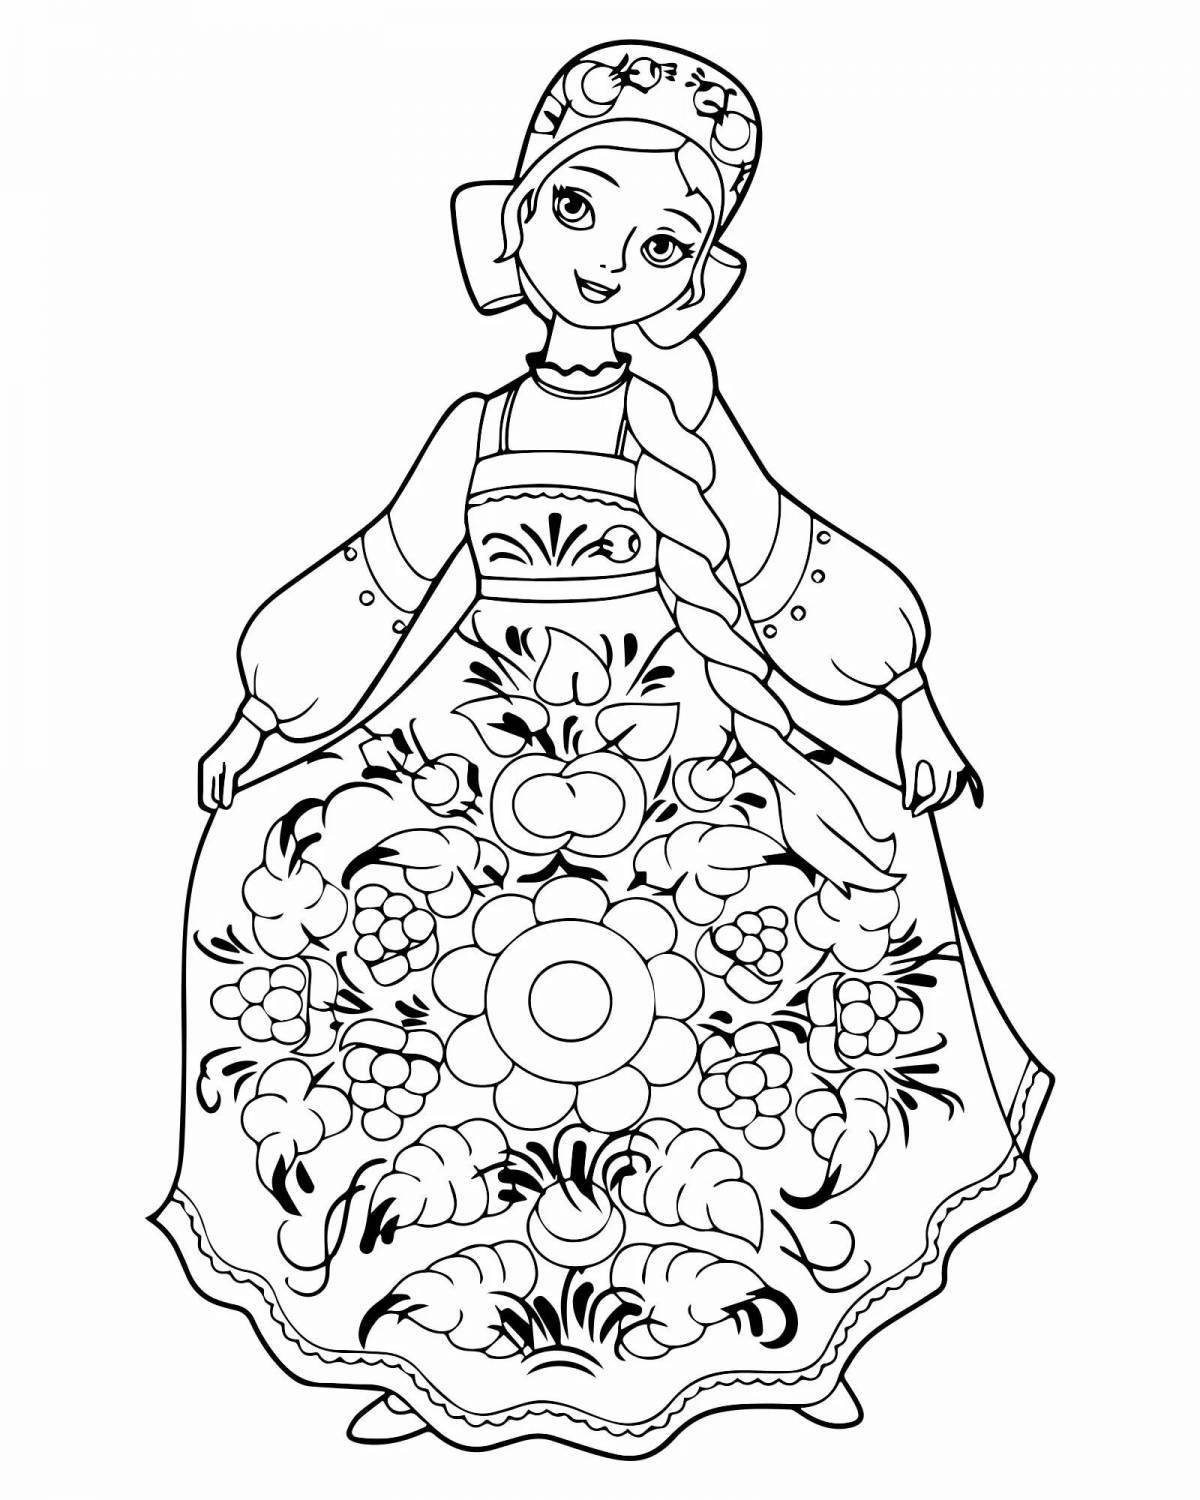 Charming russian beauty coloring book